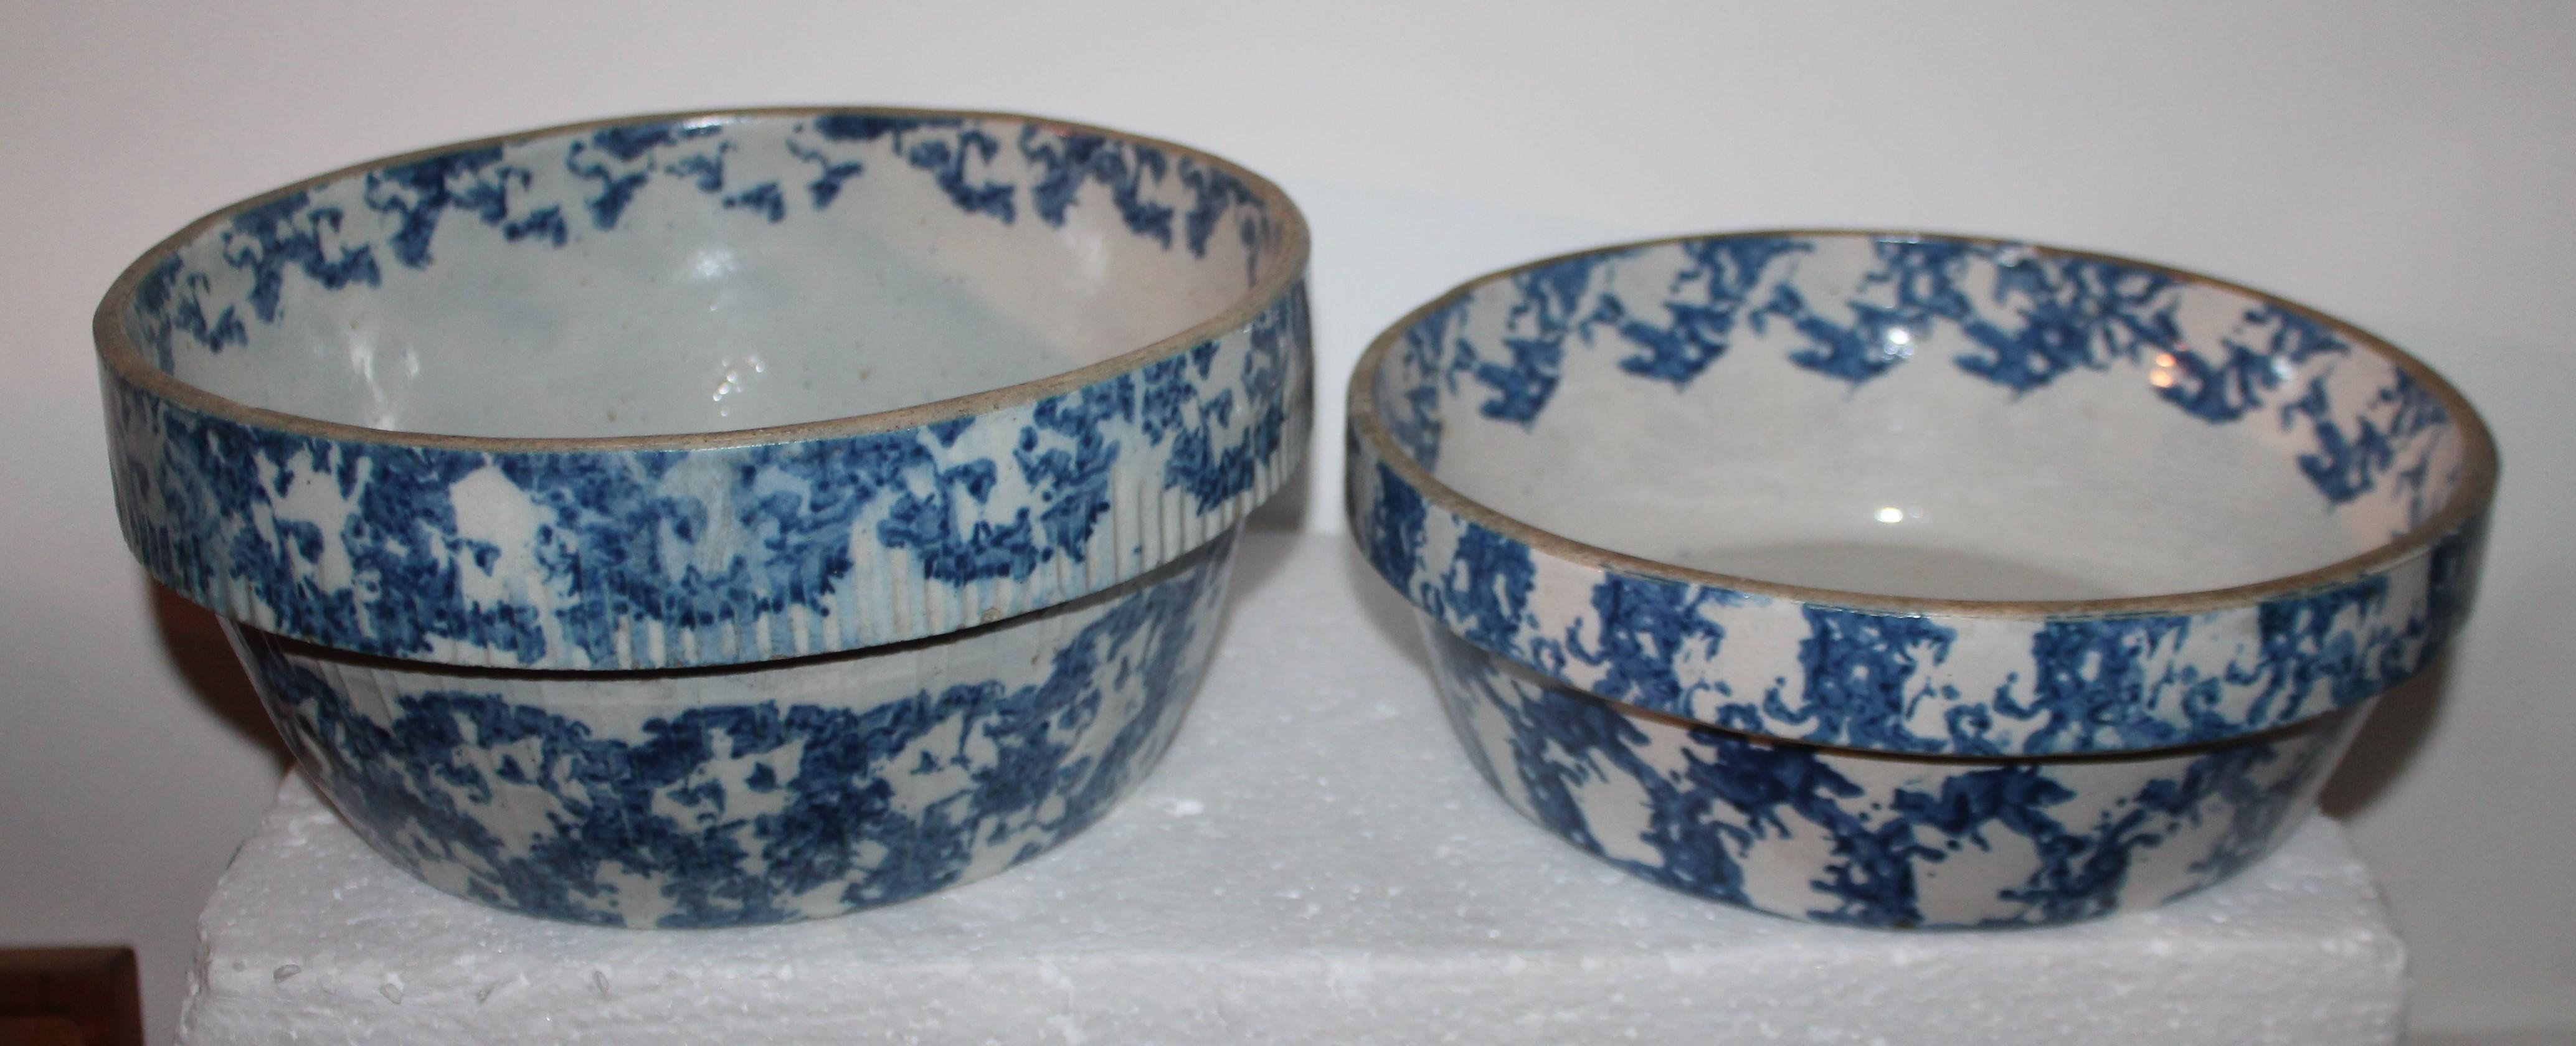 These two amazing decorated sponge ware bowls are bake dishes or bean pots. Great for serving hot or cold foods. Super for outdoor or indoor picnics. Super colors and condition. Sold as a group of two.

Large bowl measures 11 x 5 
smaller bowl